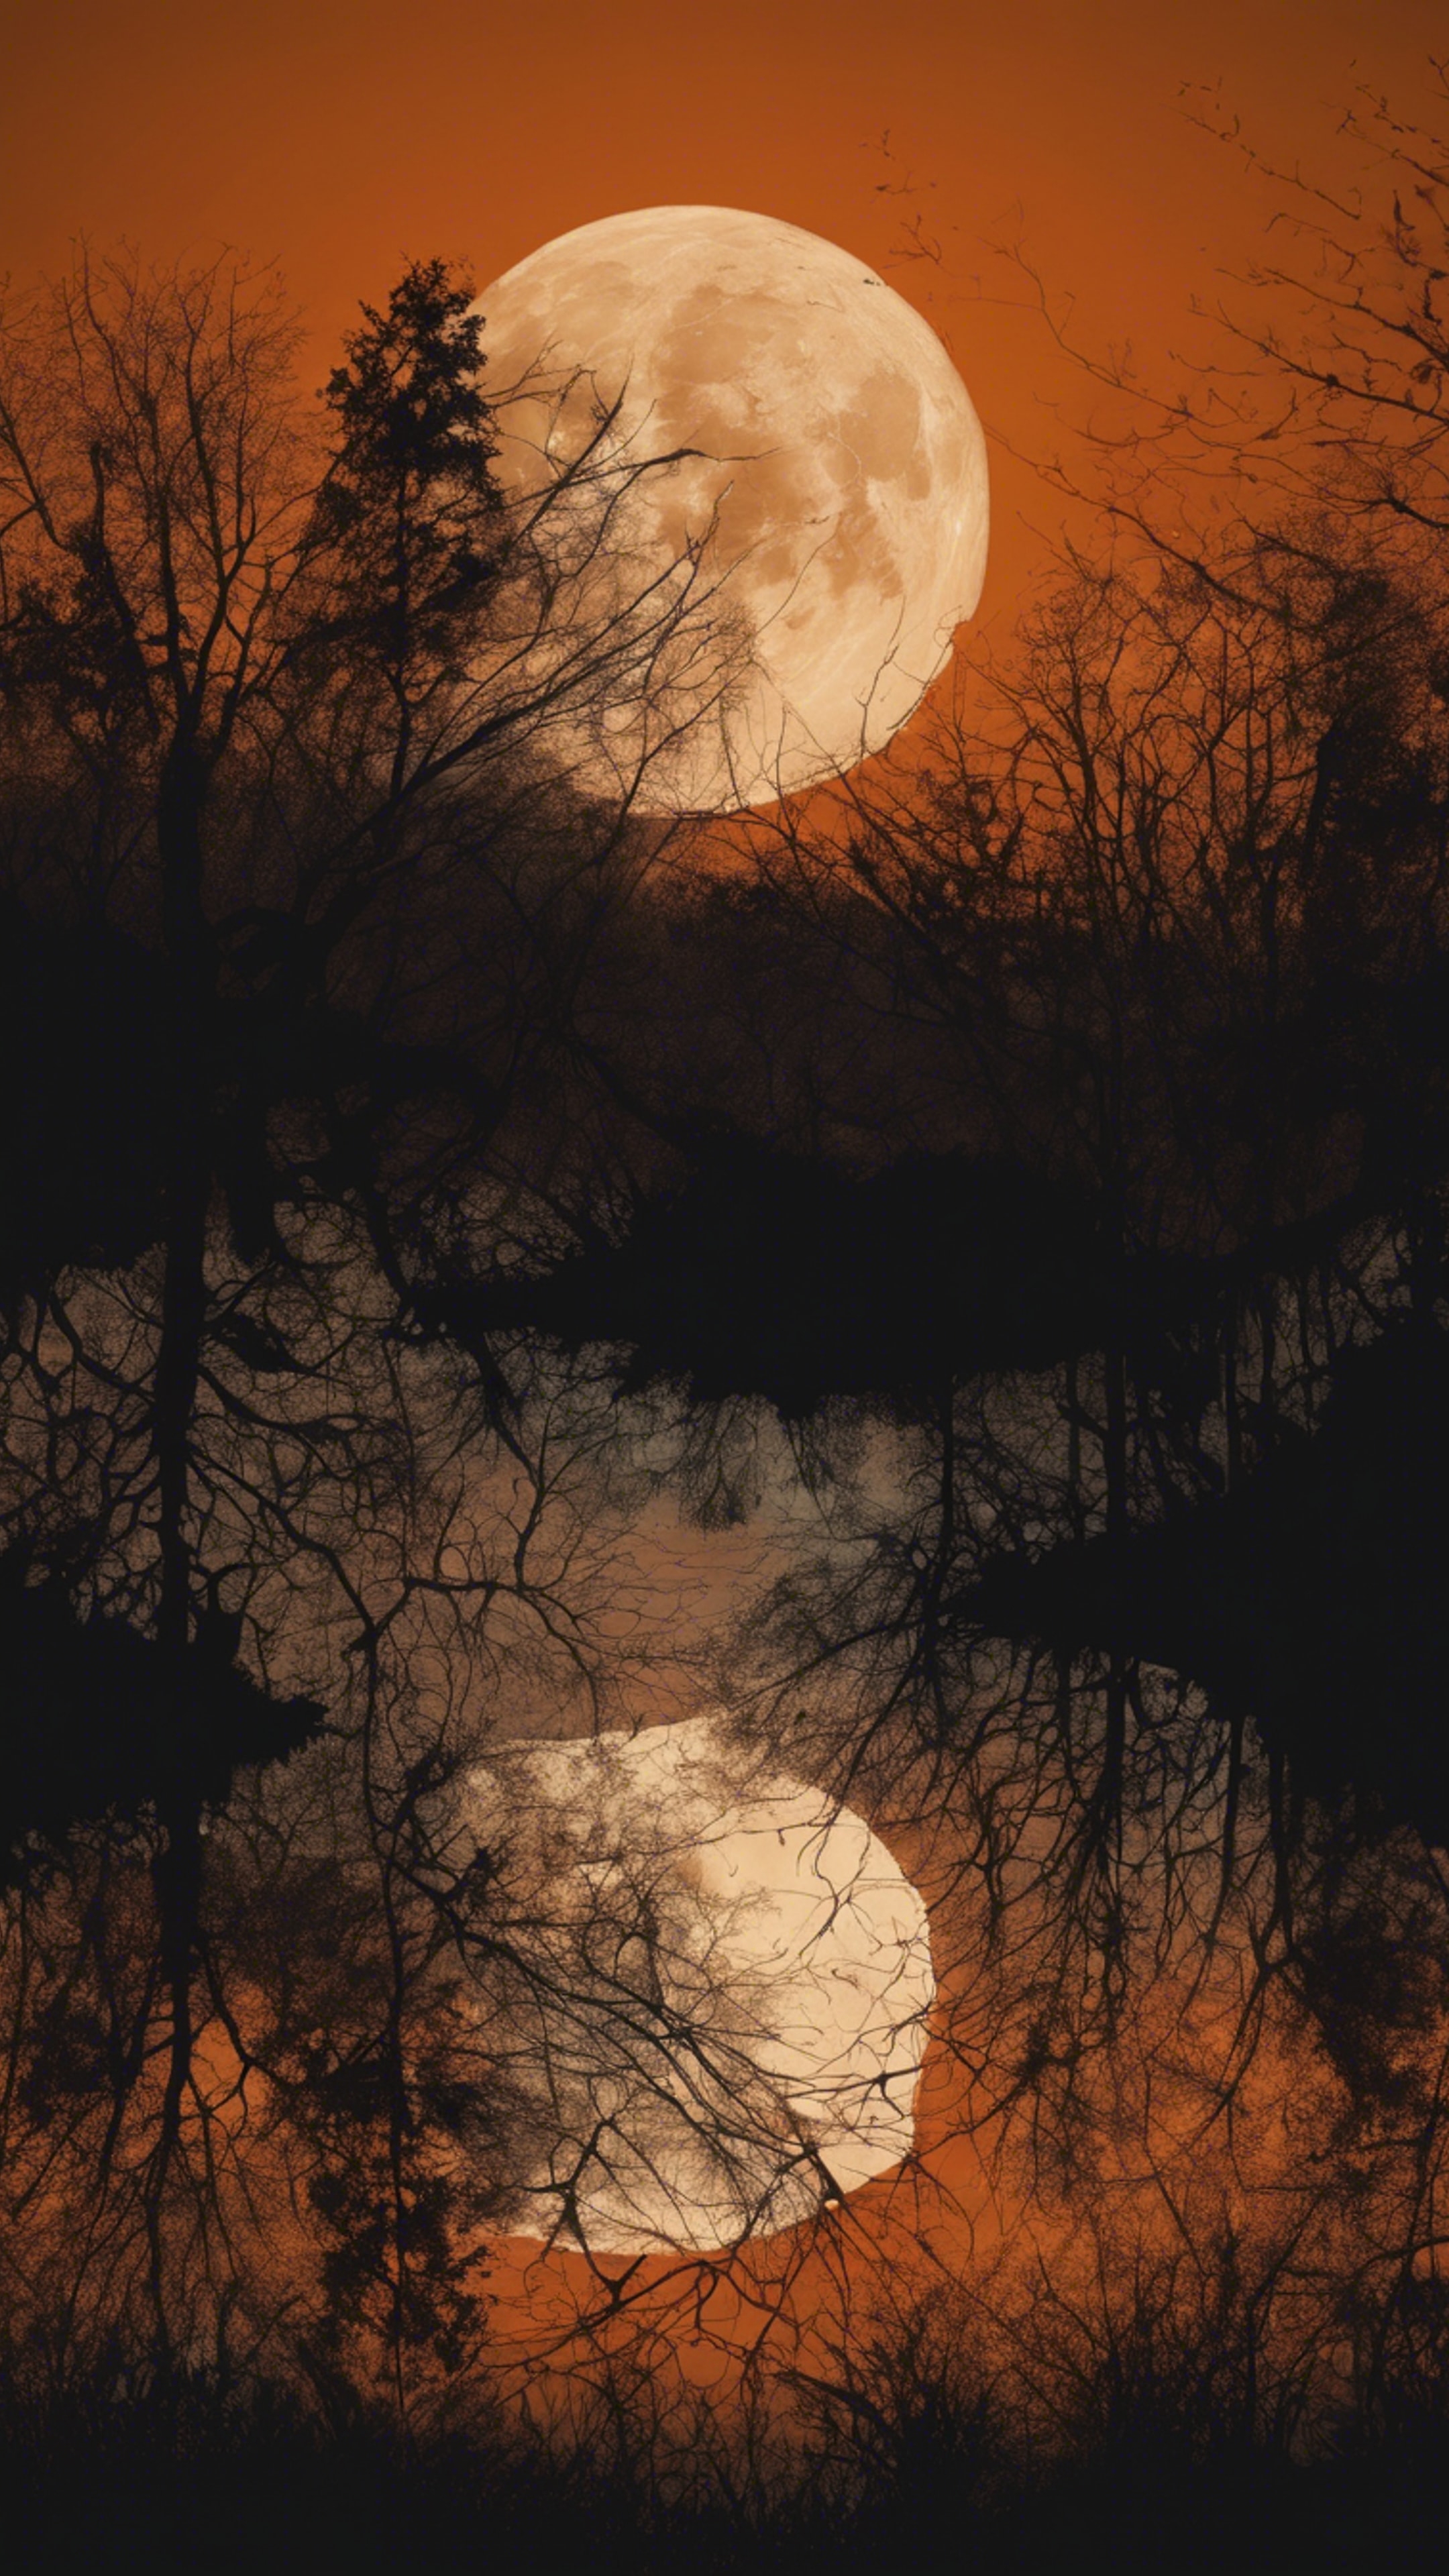 Gleaming full moon over black silhouetted forest contrasted by a deep orange sky. Tapeta[d3ef8041818348d2b22b]